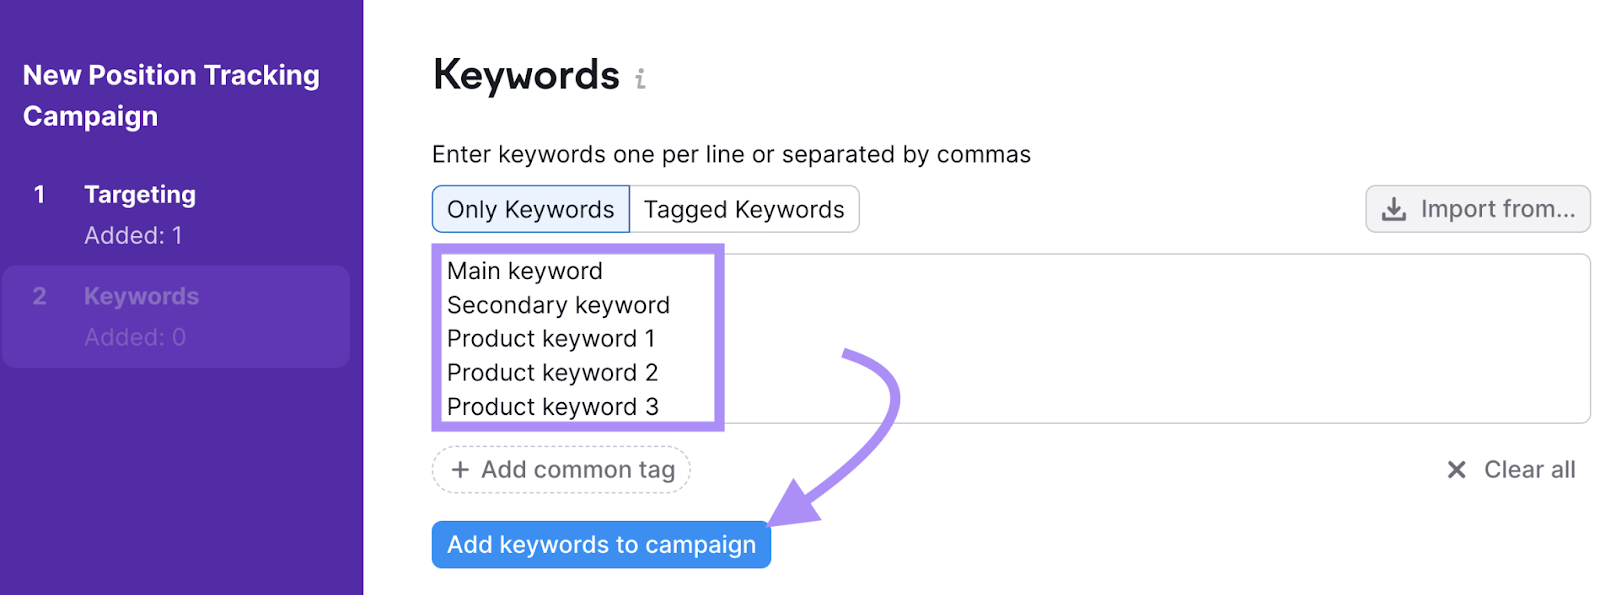 "Keywords" settings model   successful  Position Tracking tool